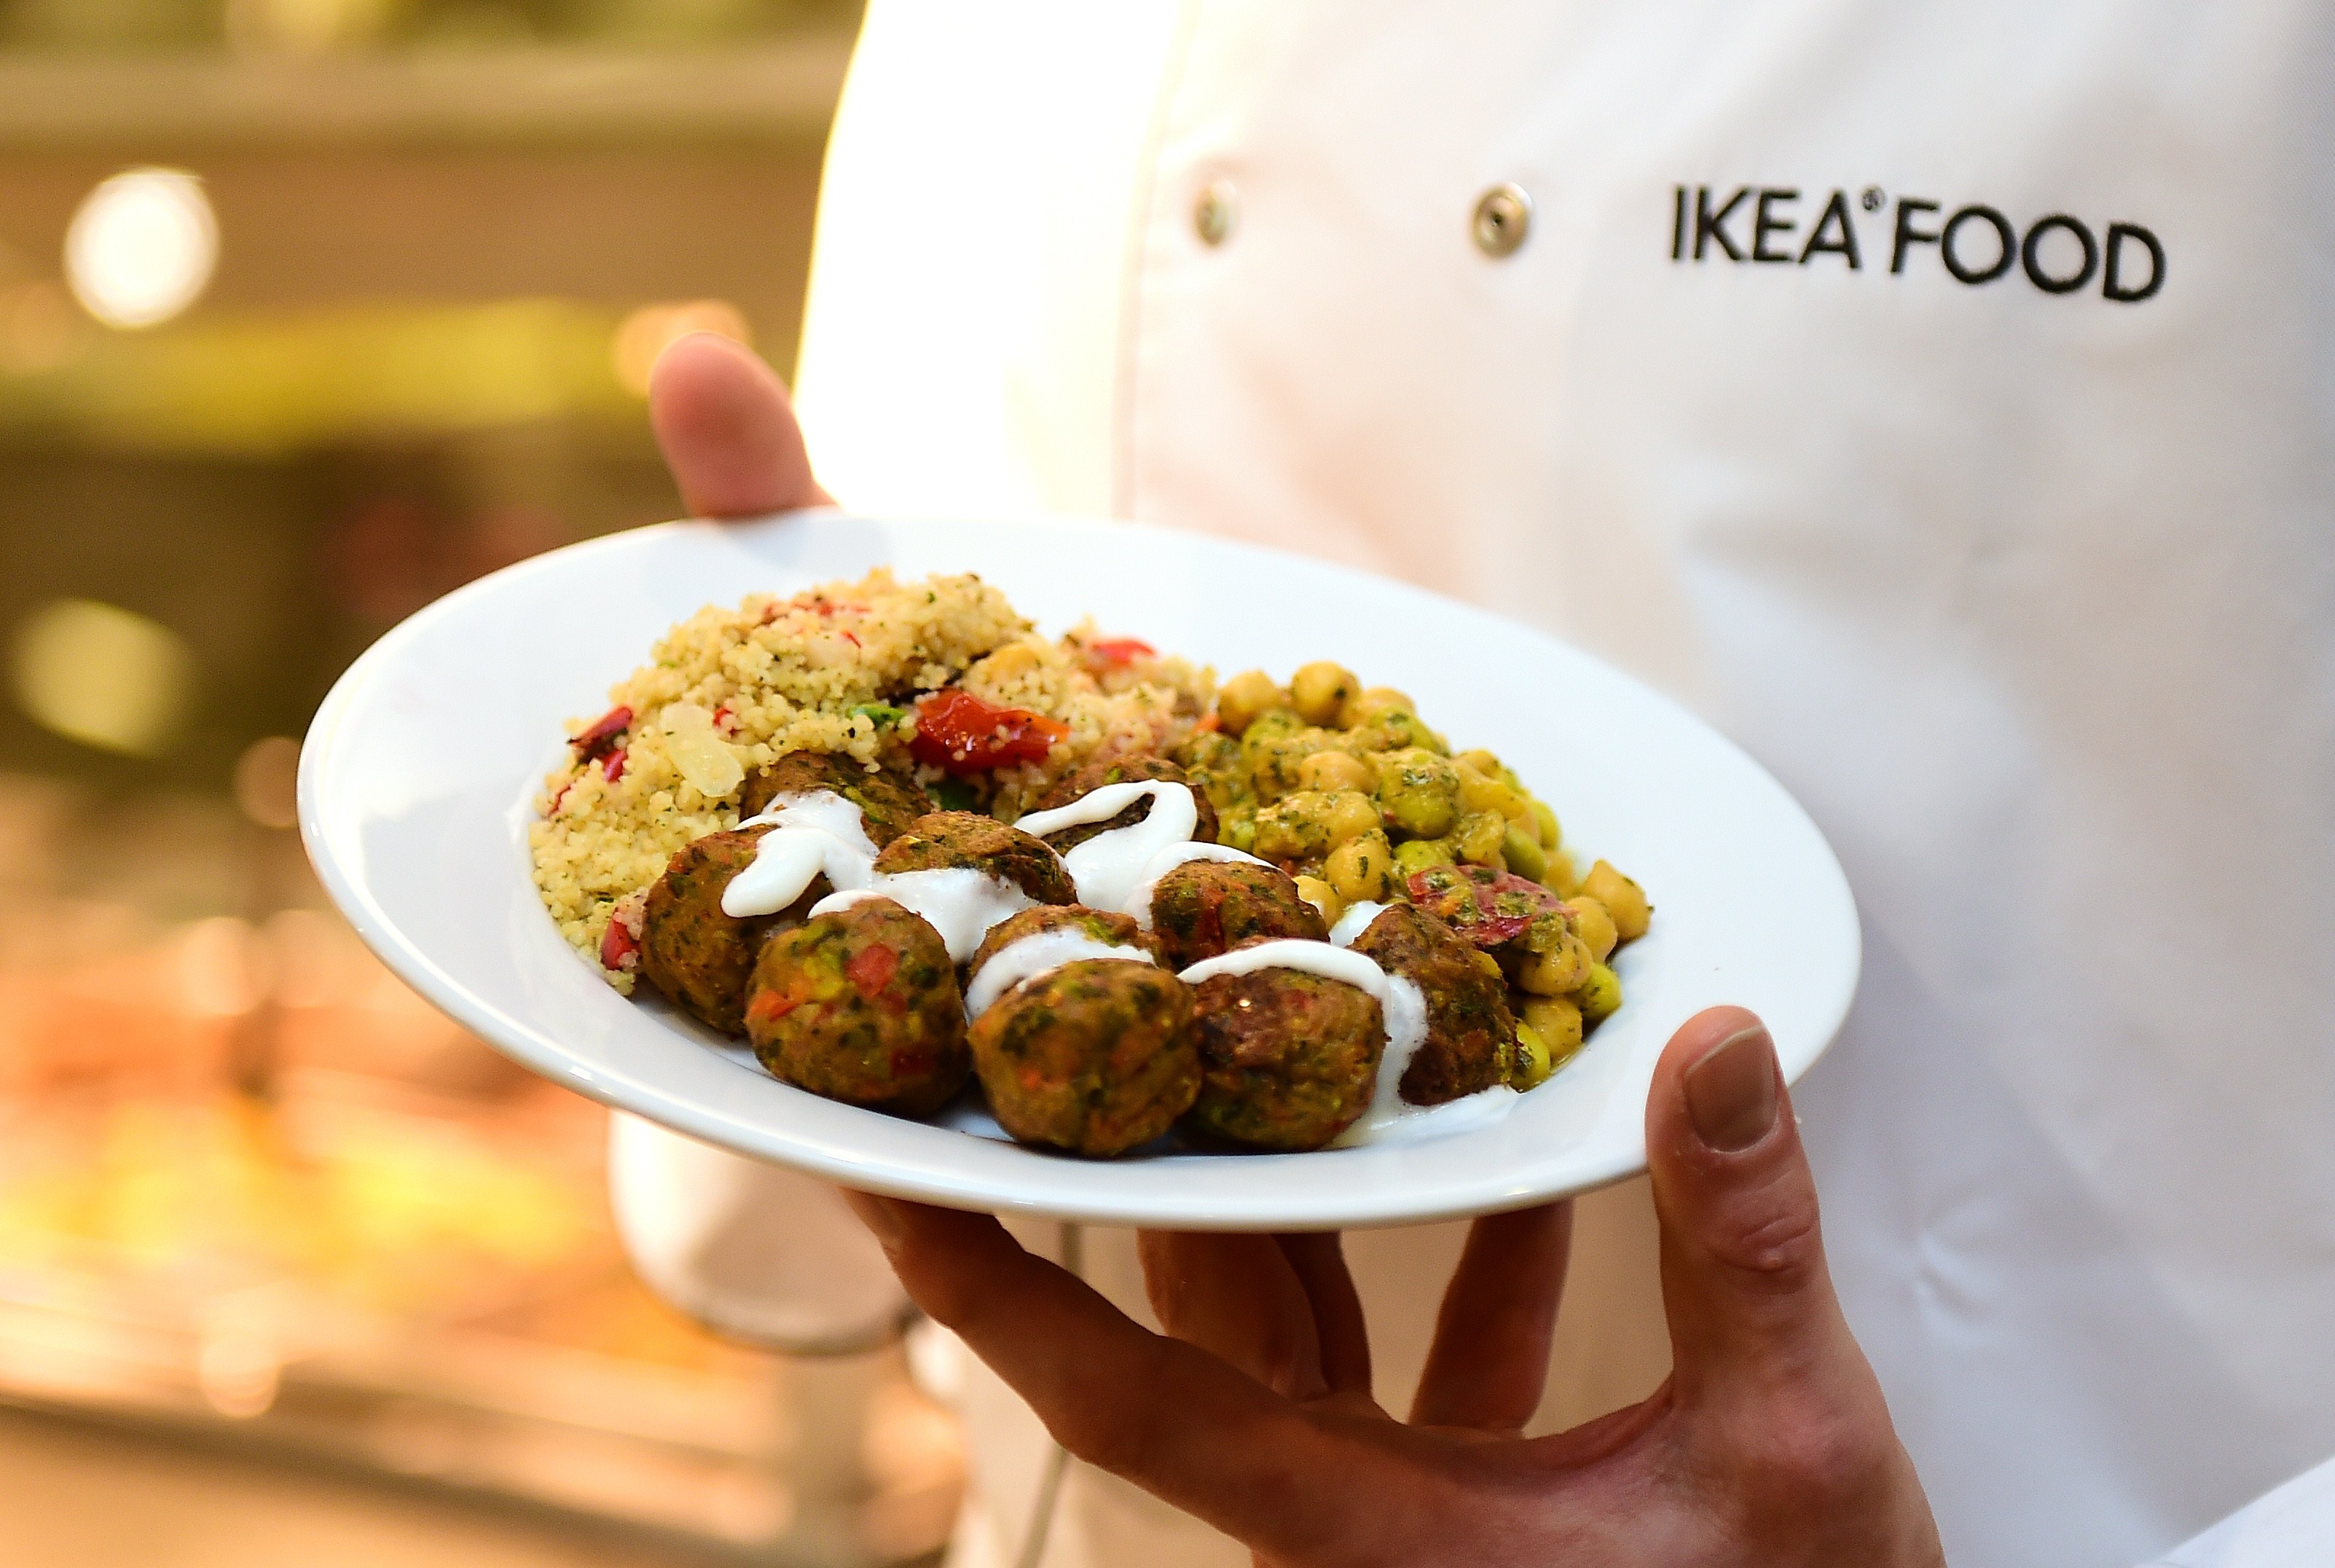 An IKEA employee displays the new IKEA vegetarian meatballs, during a worldwide launch at IKEA Anderlecht, on April 8, 2015. (EMMANUEL DUNAND&mdash;AFP/Getty Images)